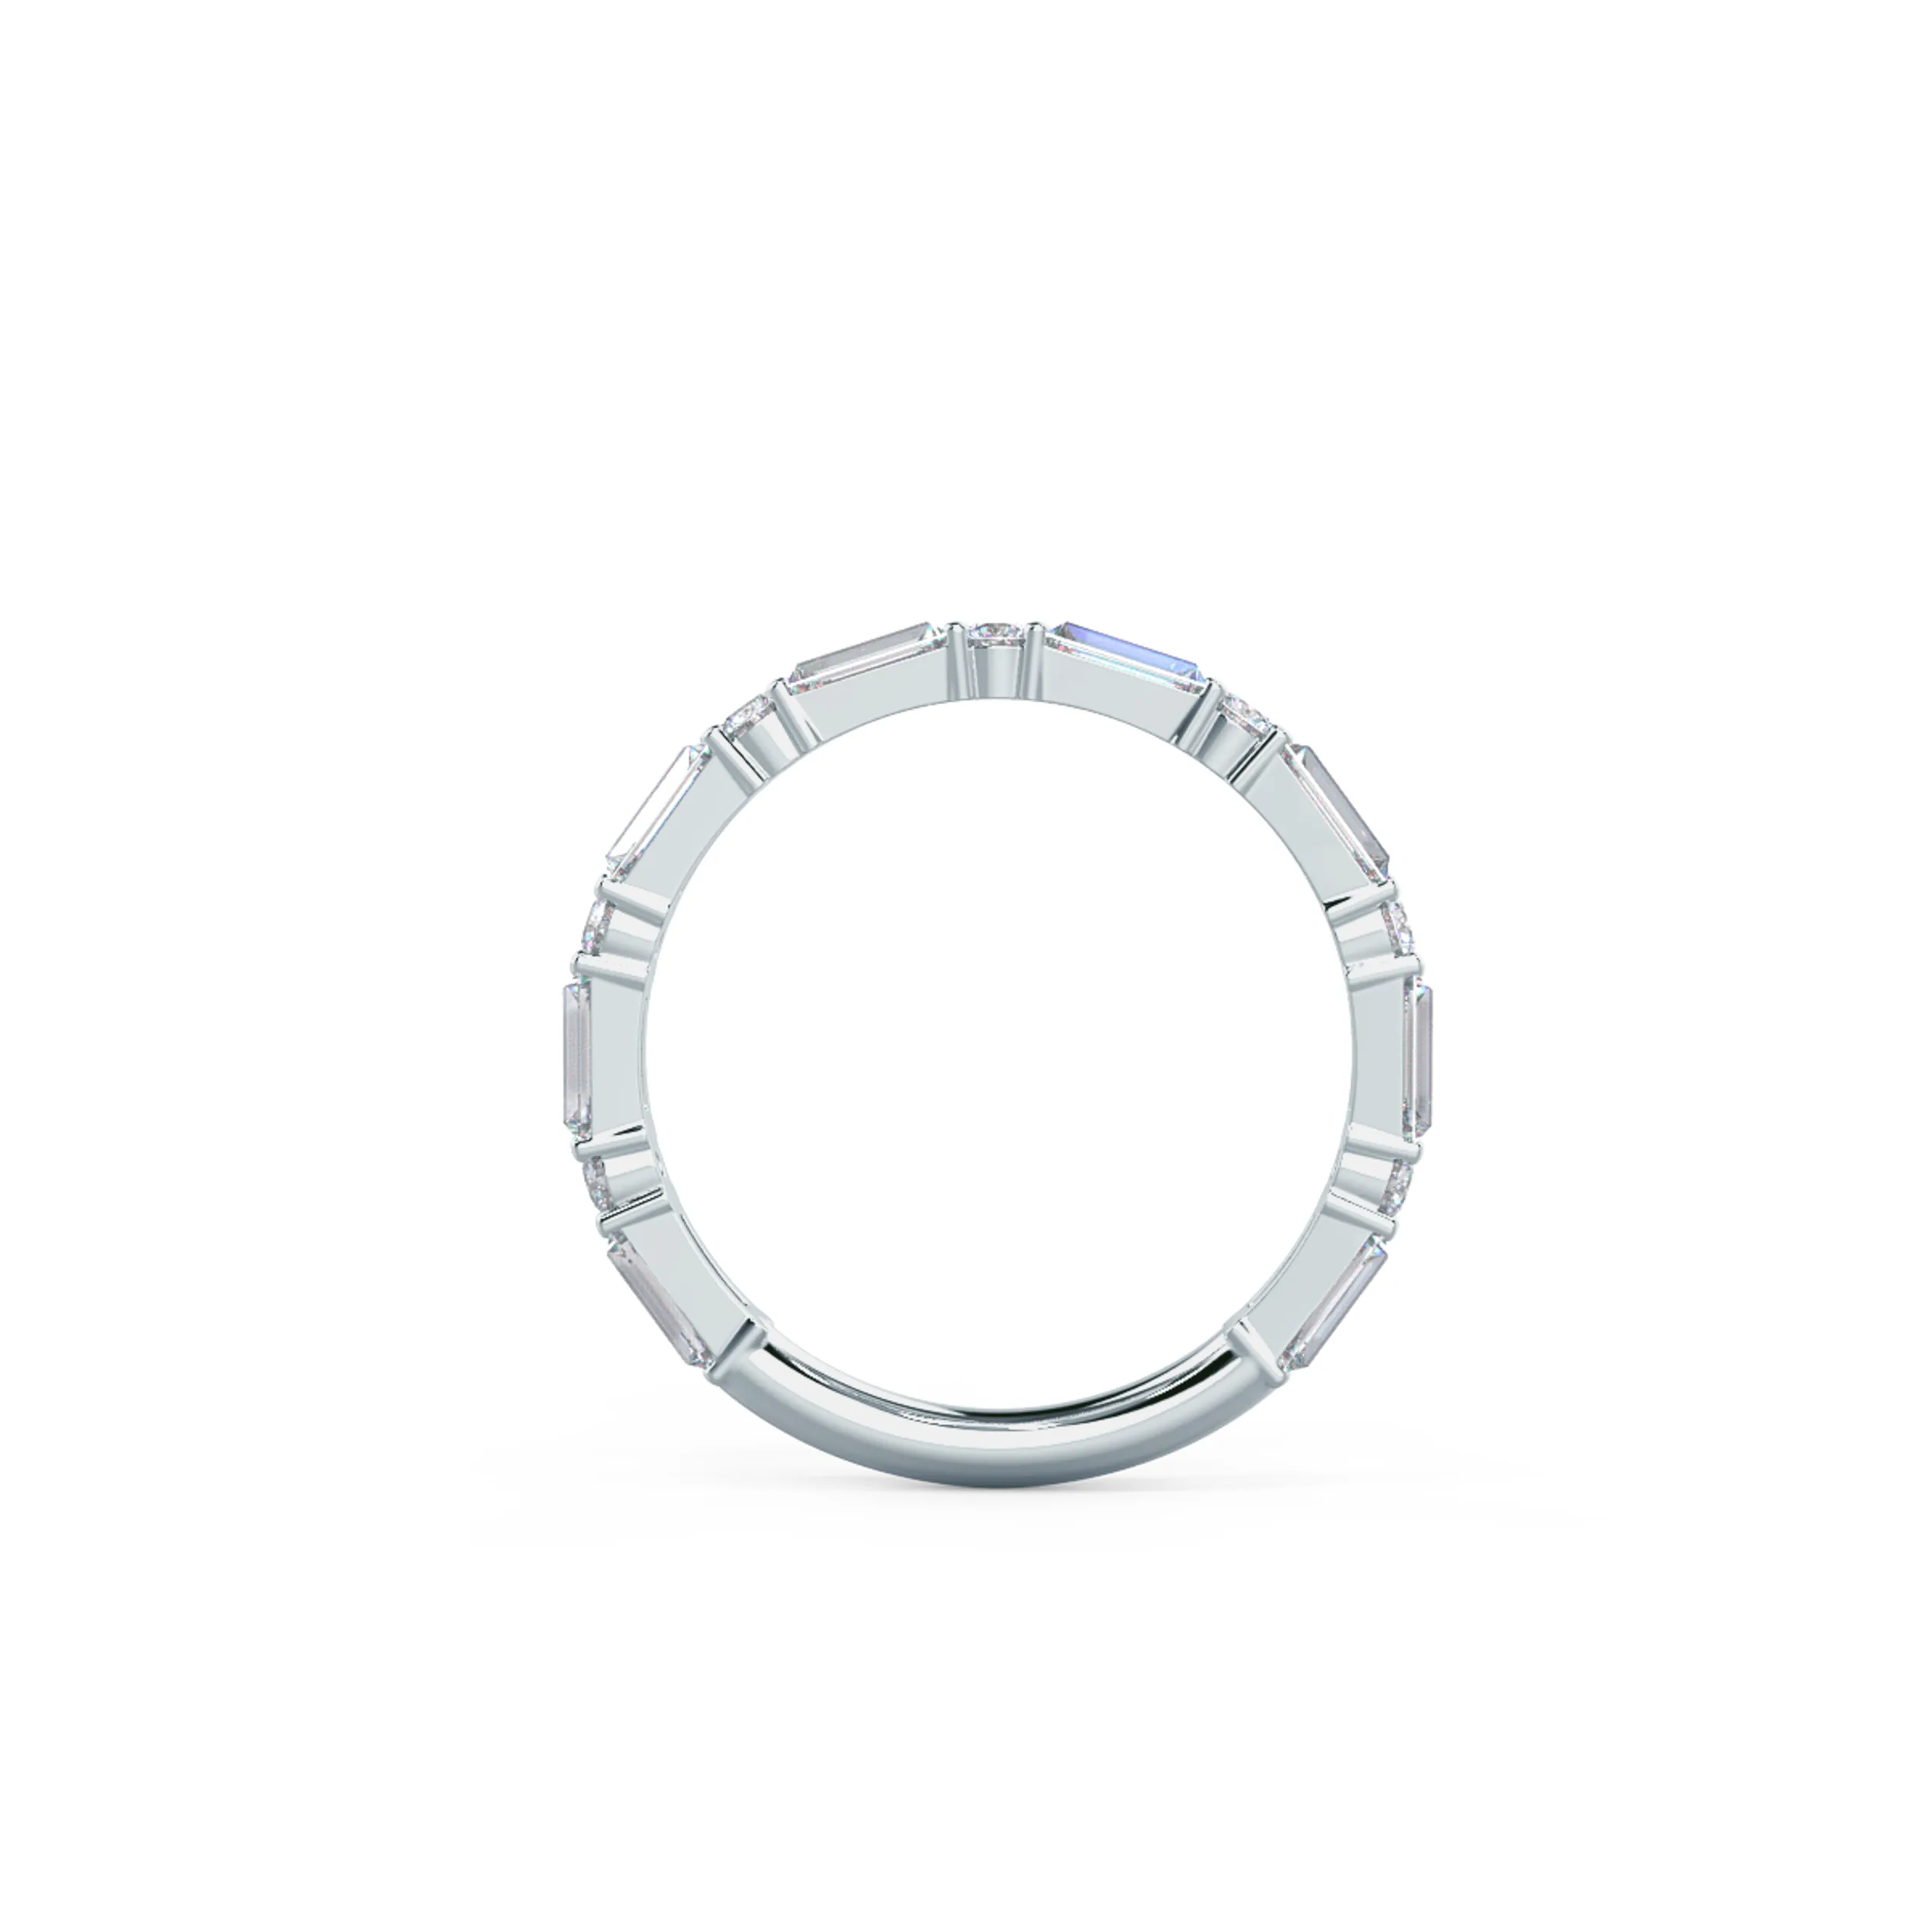 Exceptional Quality 1.0 ct Lab Diamonds Baguette and Round Three Quarter Band in 18k White Gold (Profile View)